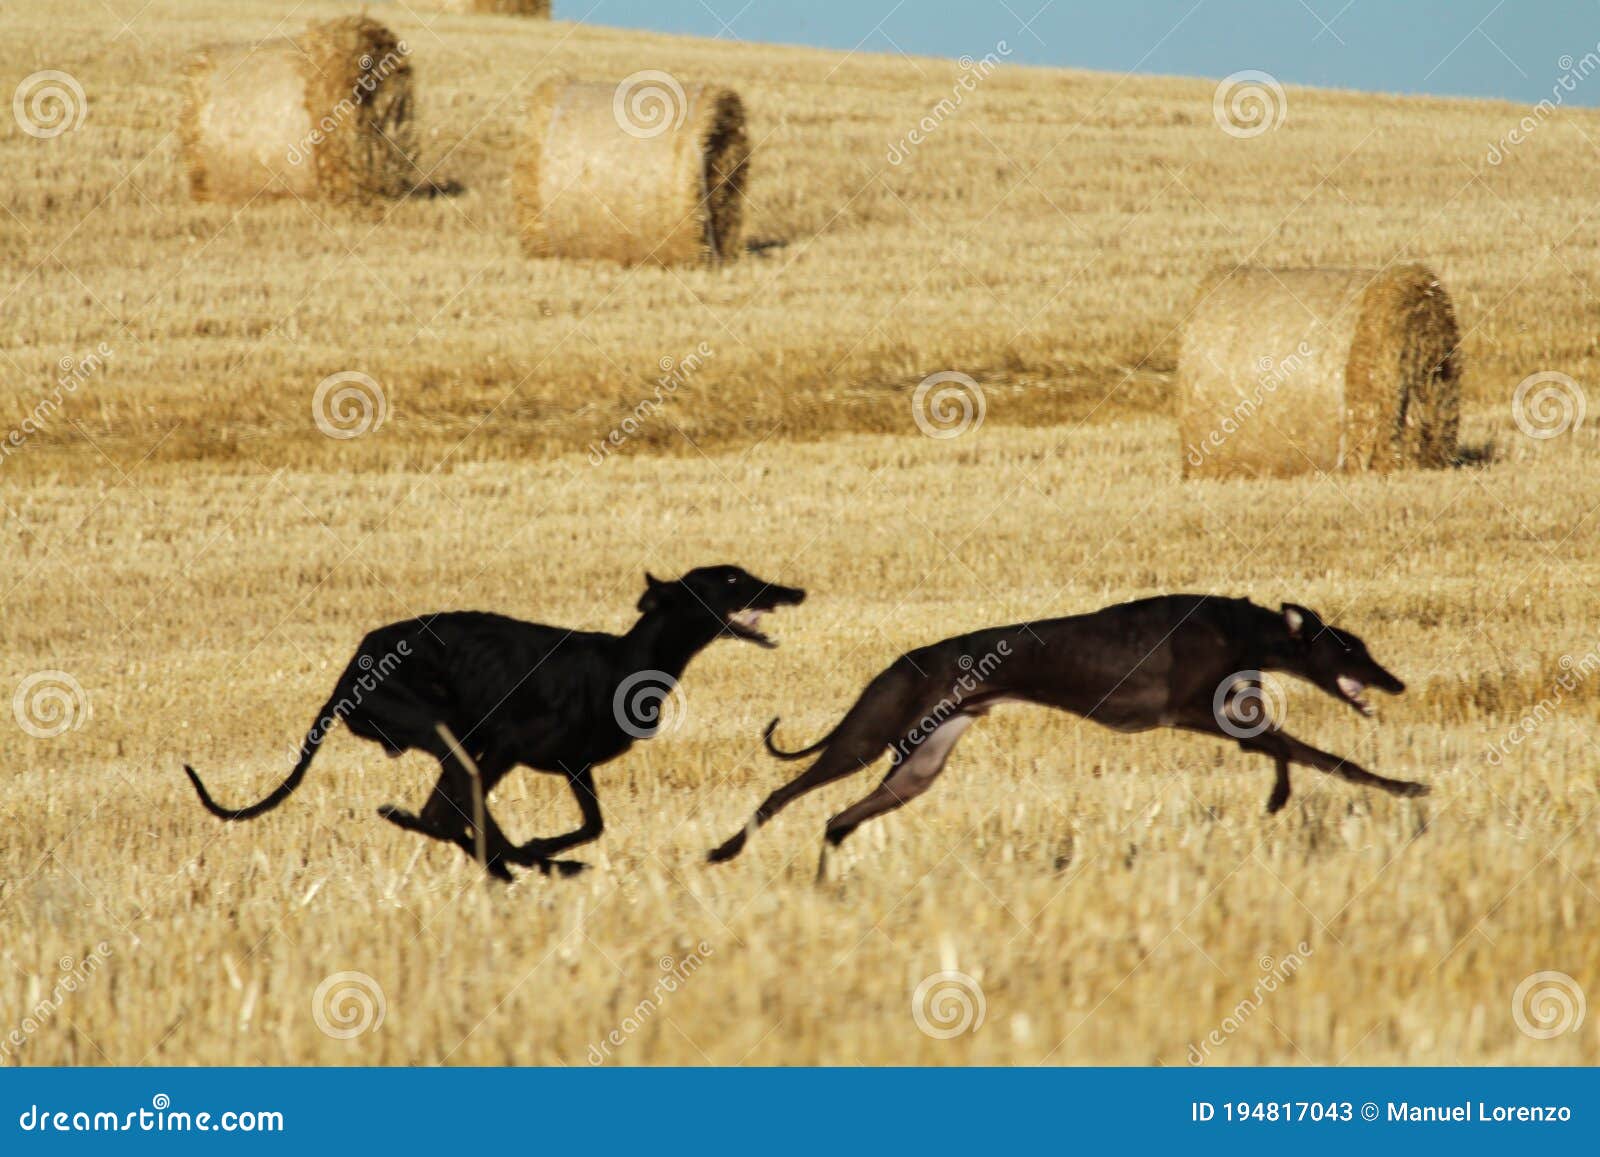 spanish greyhound in mechanical hare race in the countryside